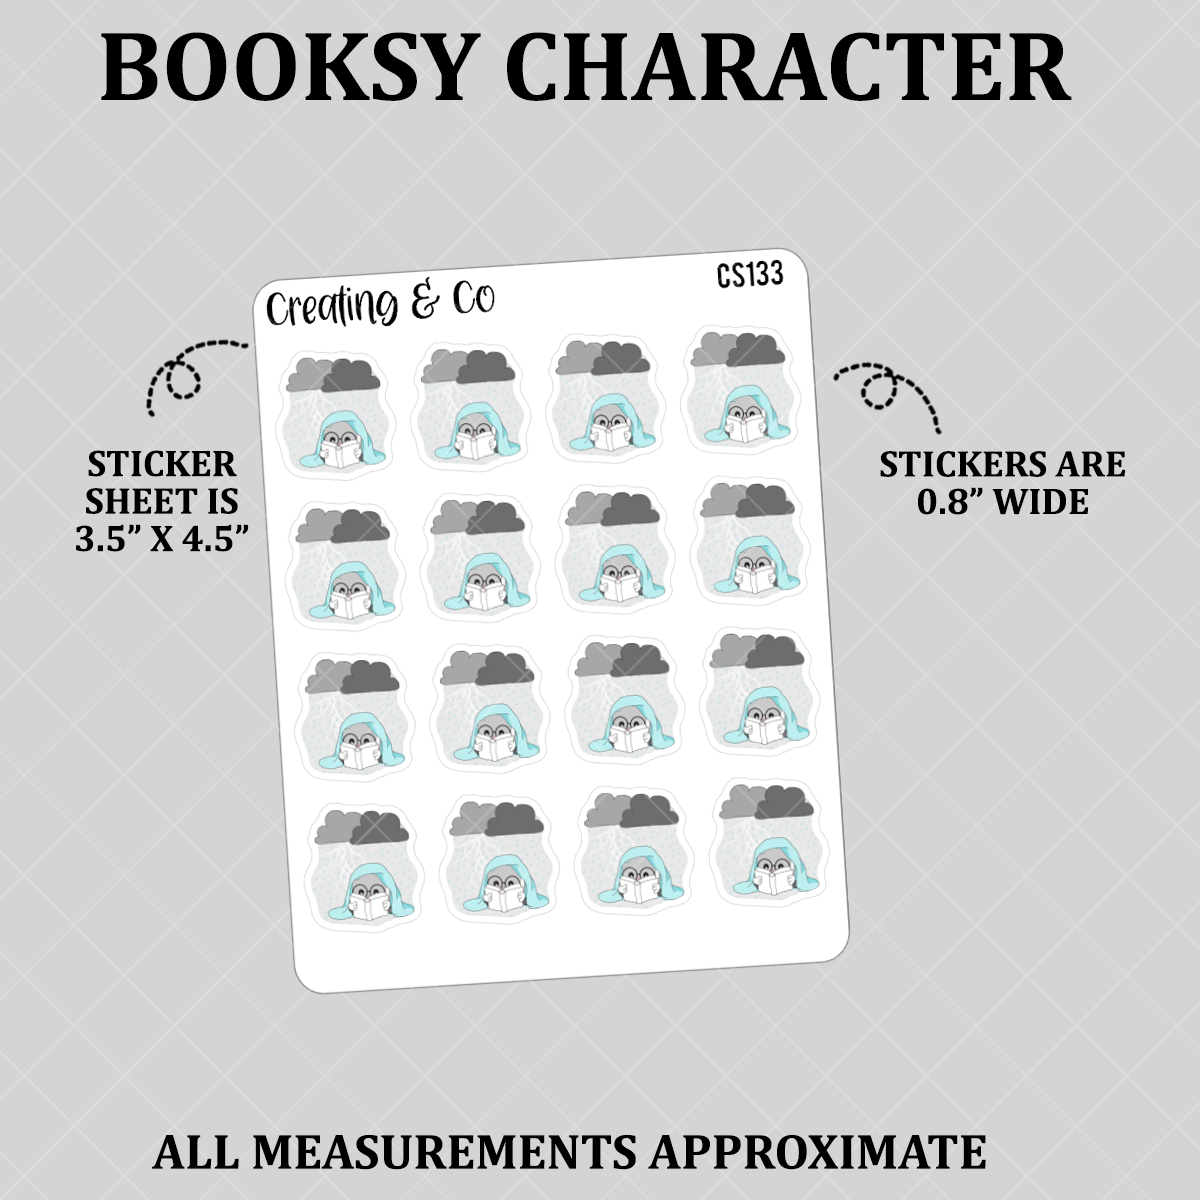 Thunderstorm Booksy Character Functional Stickers - CS133